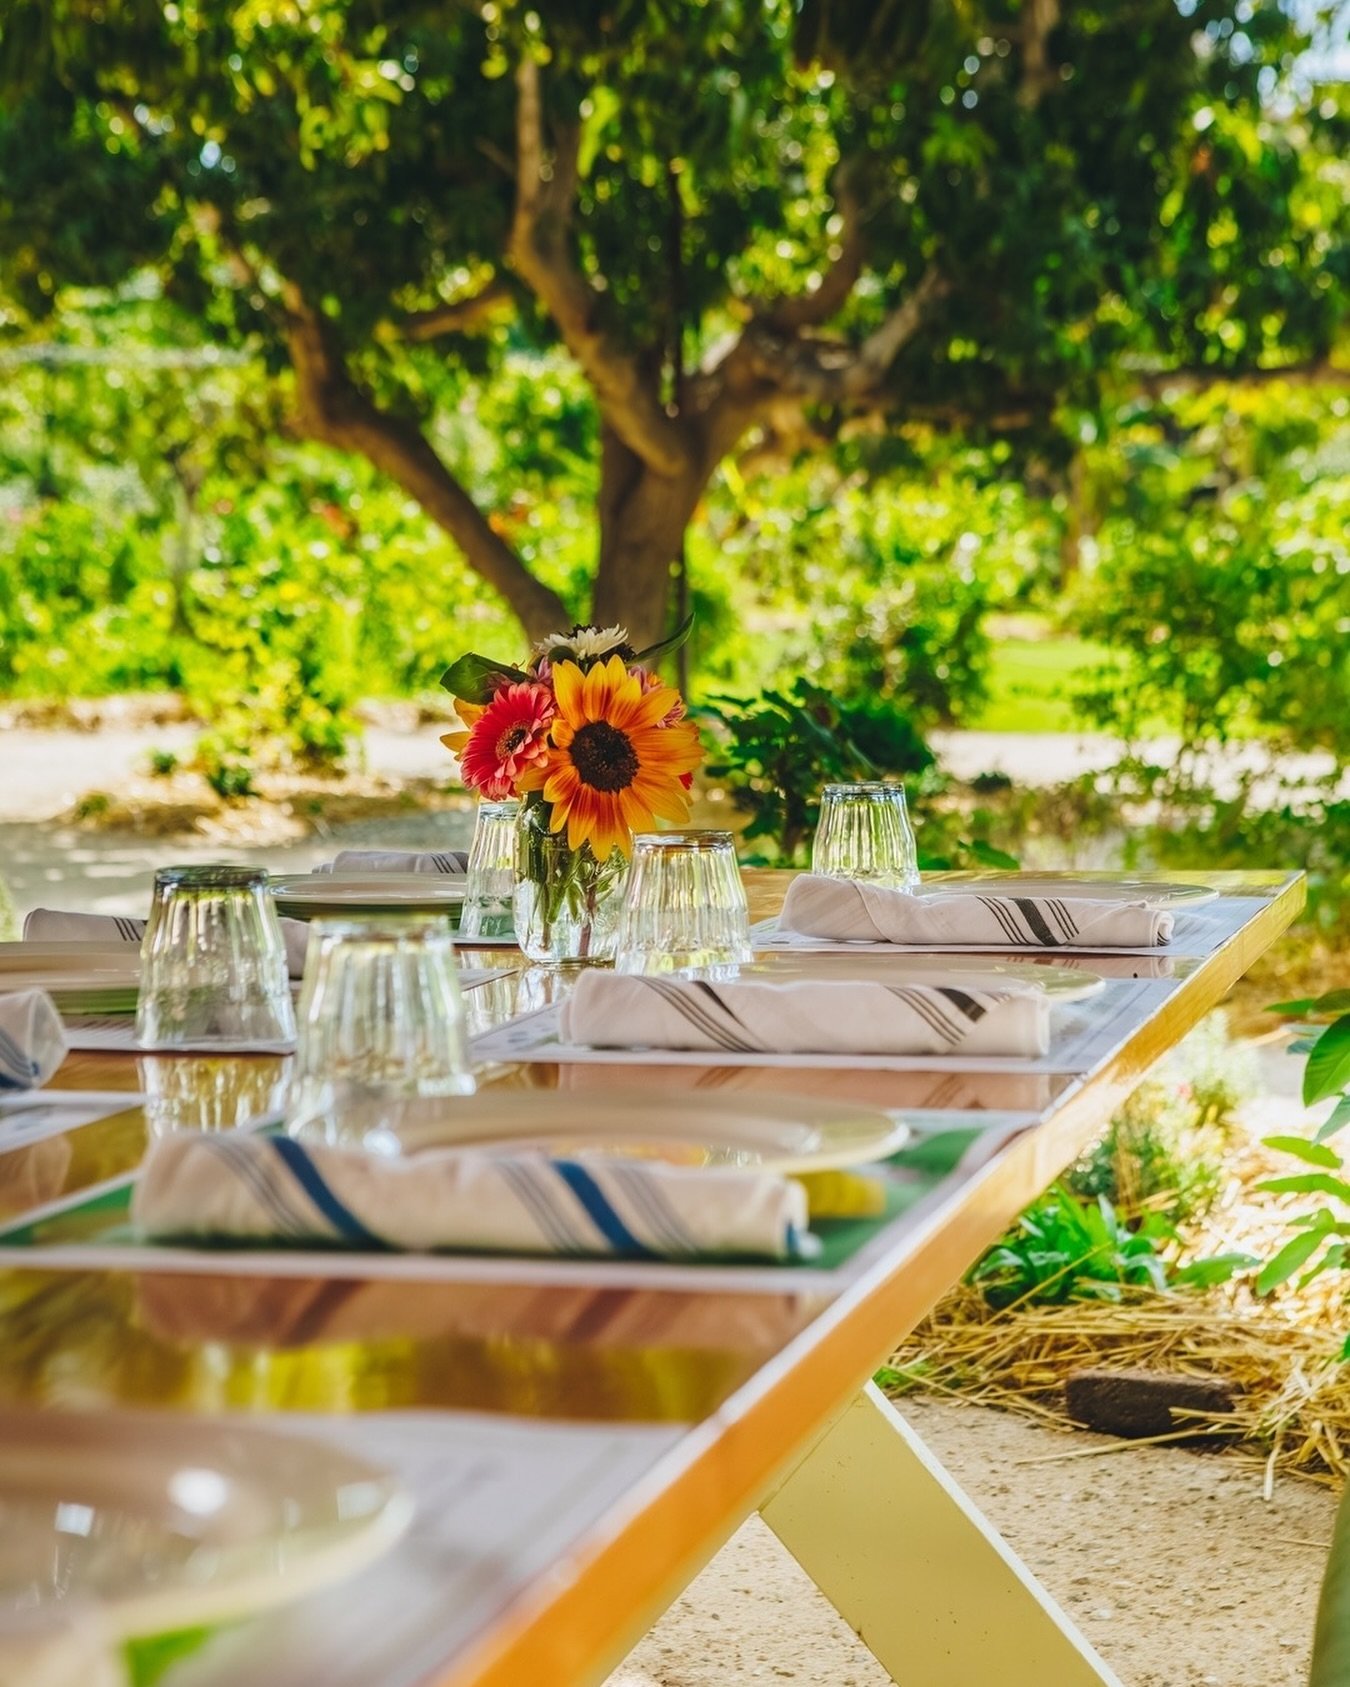 Enjoying lunch outdoors, surrounded by mango trees and flowers, following a fun cooking class on the farm? That&rsquo;s the vibe.